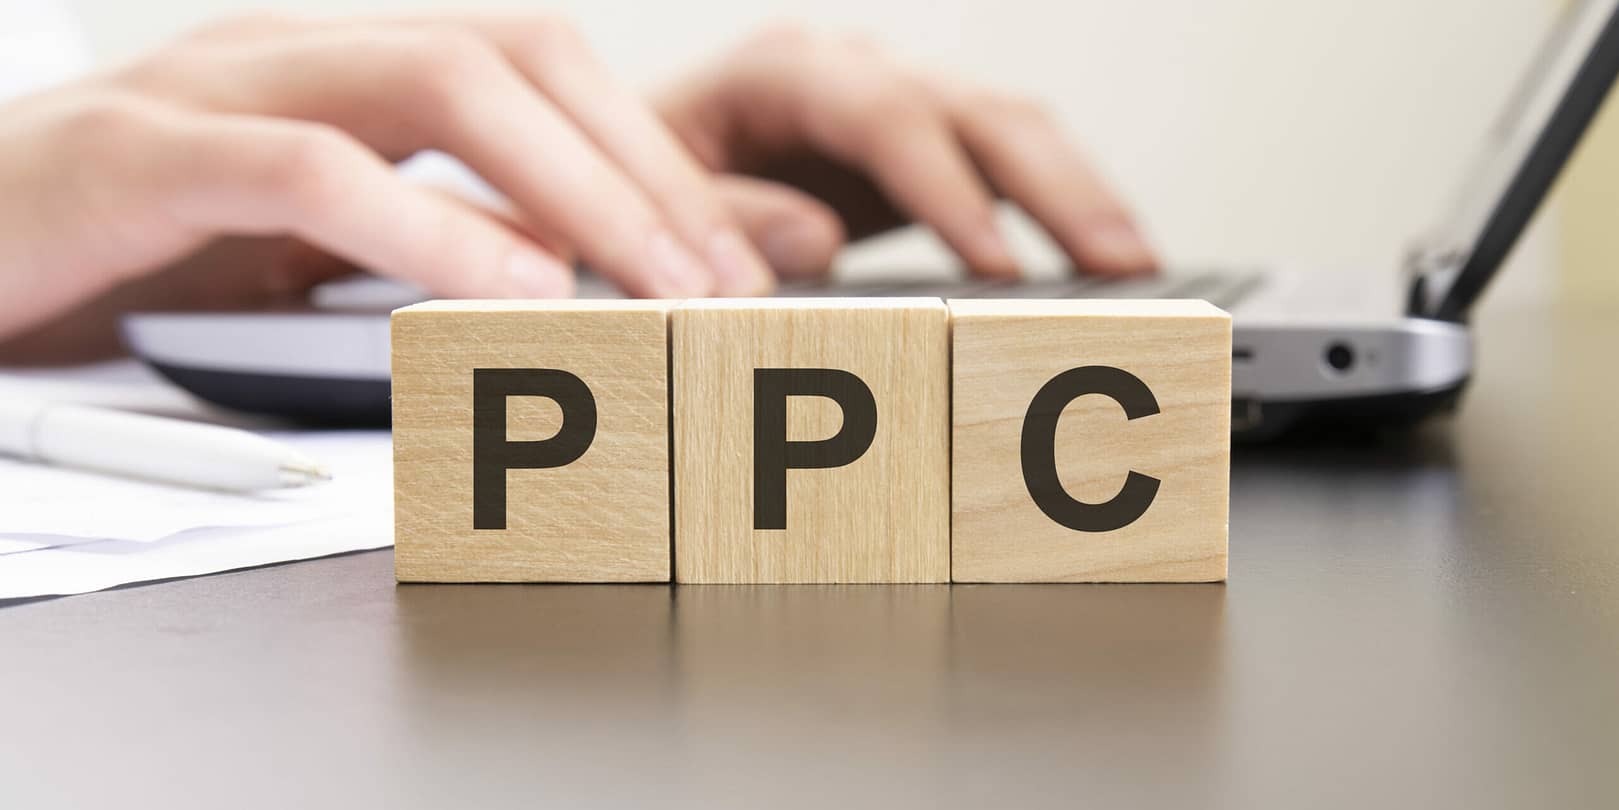 Ppc Acronym From Wooden Blocks With Letters. Background Hands On A Laptop With Blur. Business Concept.